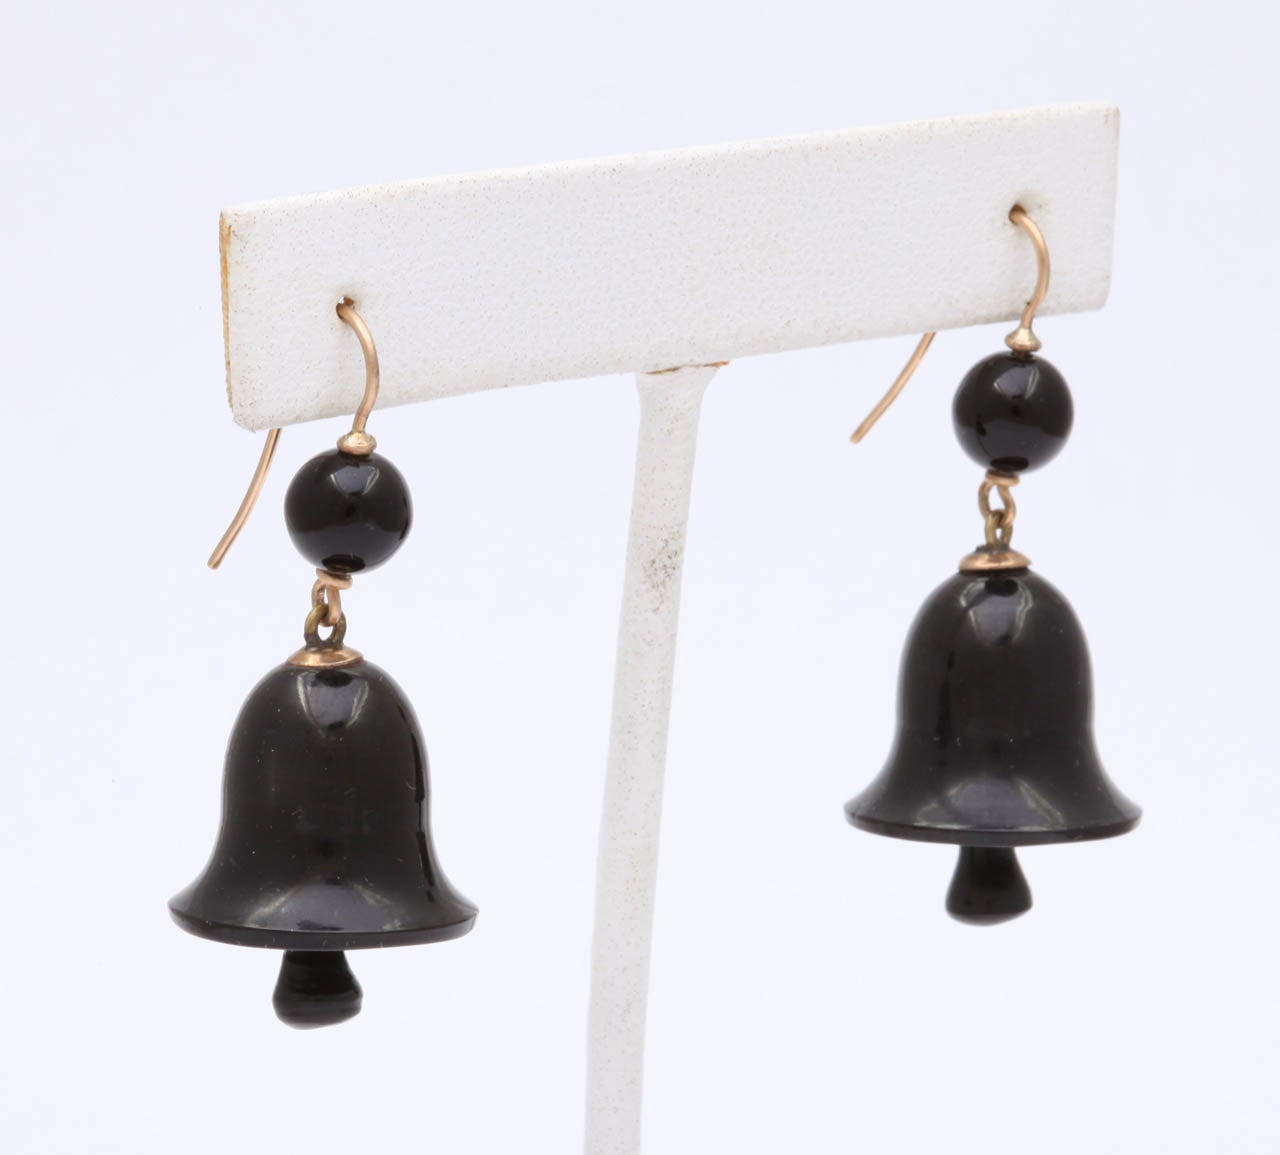 The form and condition of these Victorian earrings is perfect from top orb to clamper below. Smooth shining bells, the symbol of friendship and peace are made from Jet from the city of Whitby England. They will move as you do but will not put weight